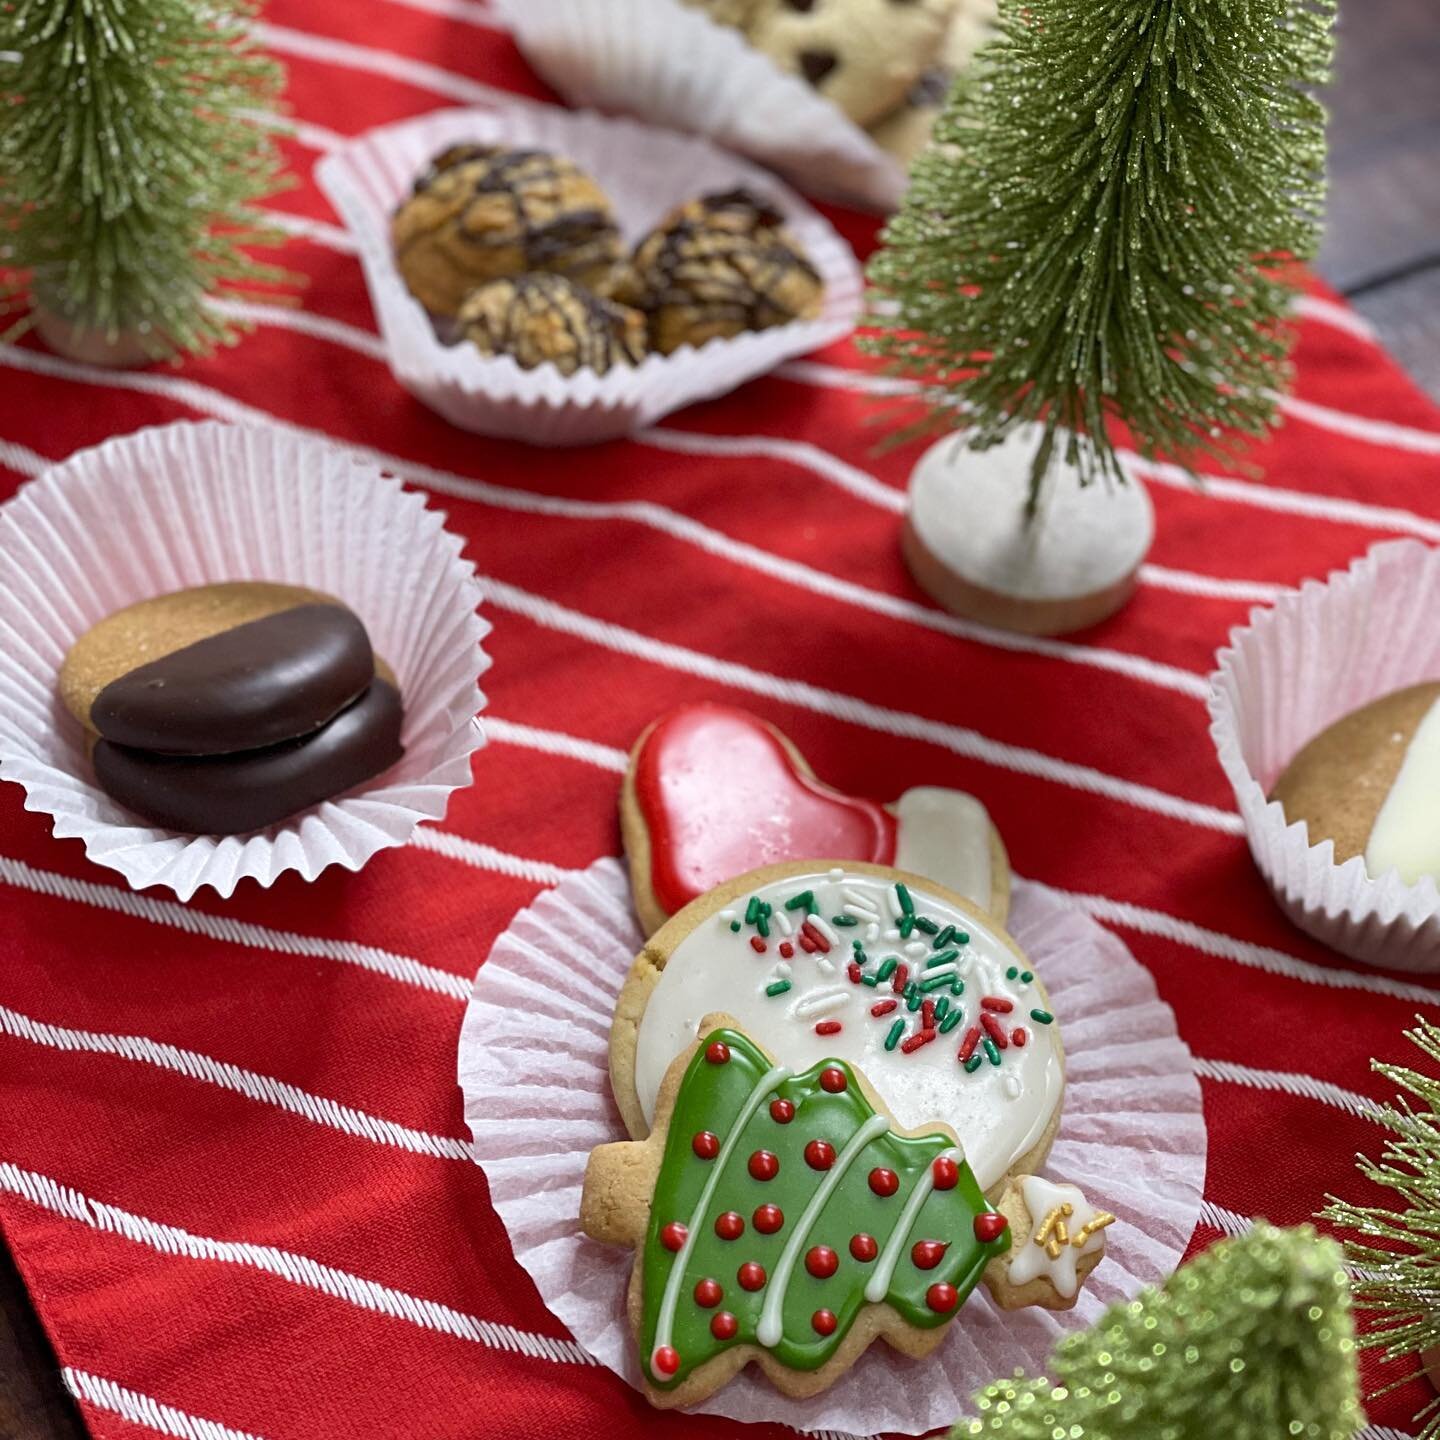 It&rsquo;s officially Christmas Season here at the Bakery! Our shop page is live with all our favorite Holiday Treats this year. 

Next week we will be highlighting each item that is on our Christmas Menu. Be sure to follow along!

With the holidays,